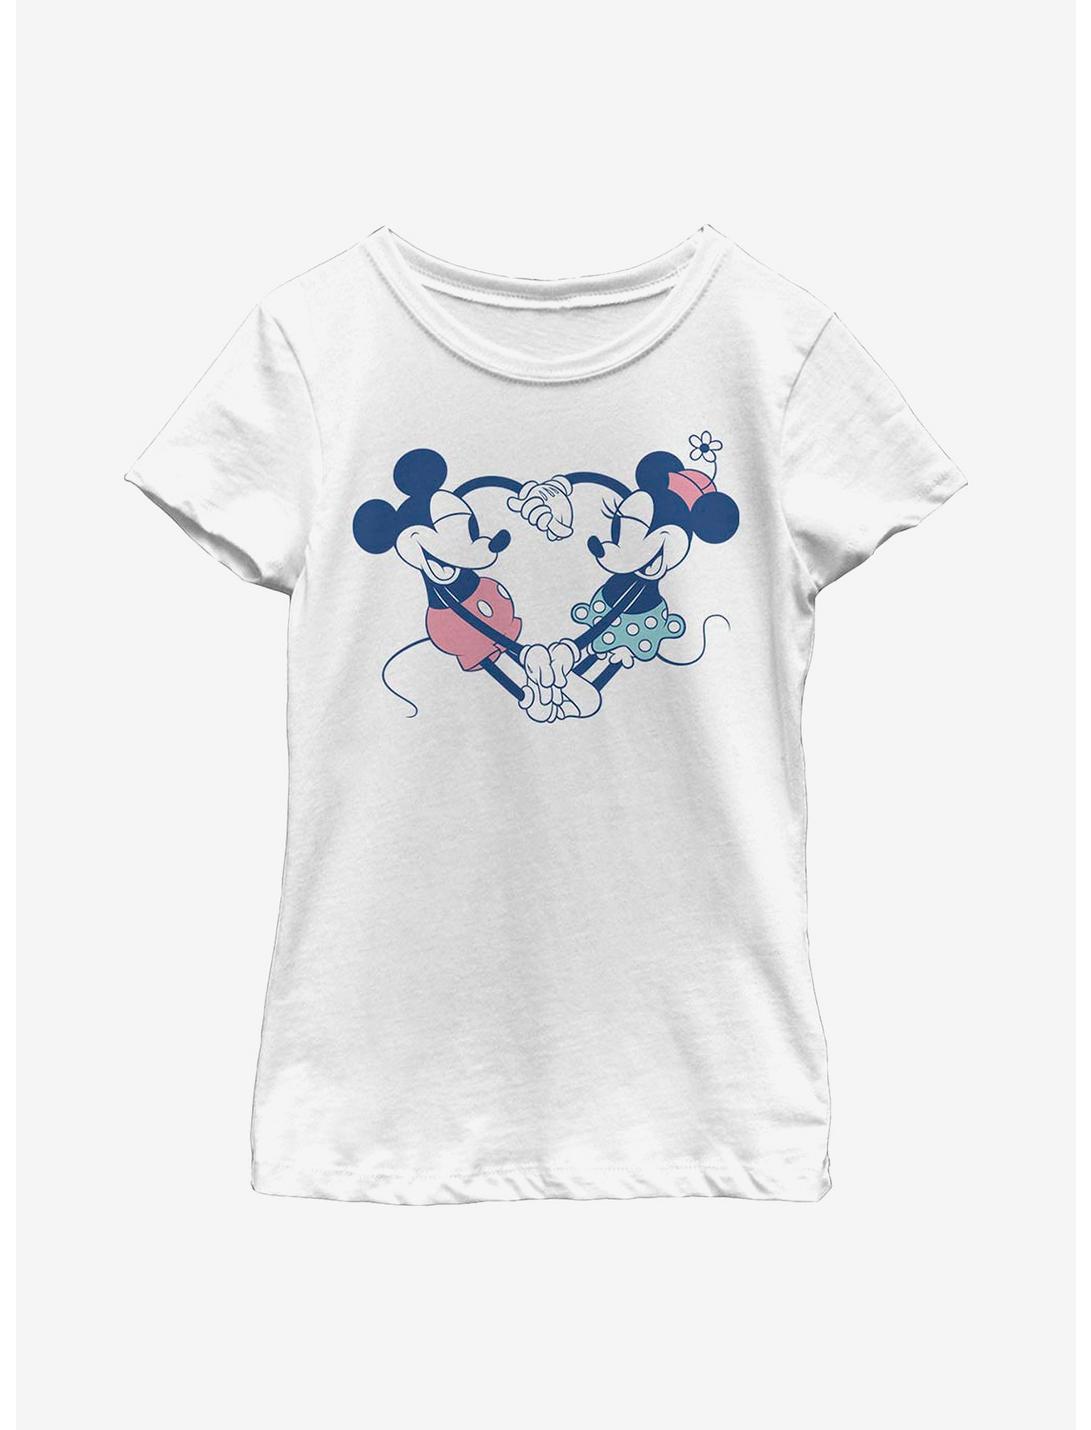 Disney Mickey Mouse Heart Pair Youth Girls T-Shirt, WHITE, hi-res